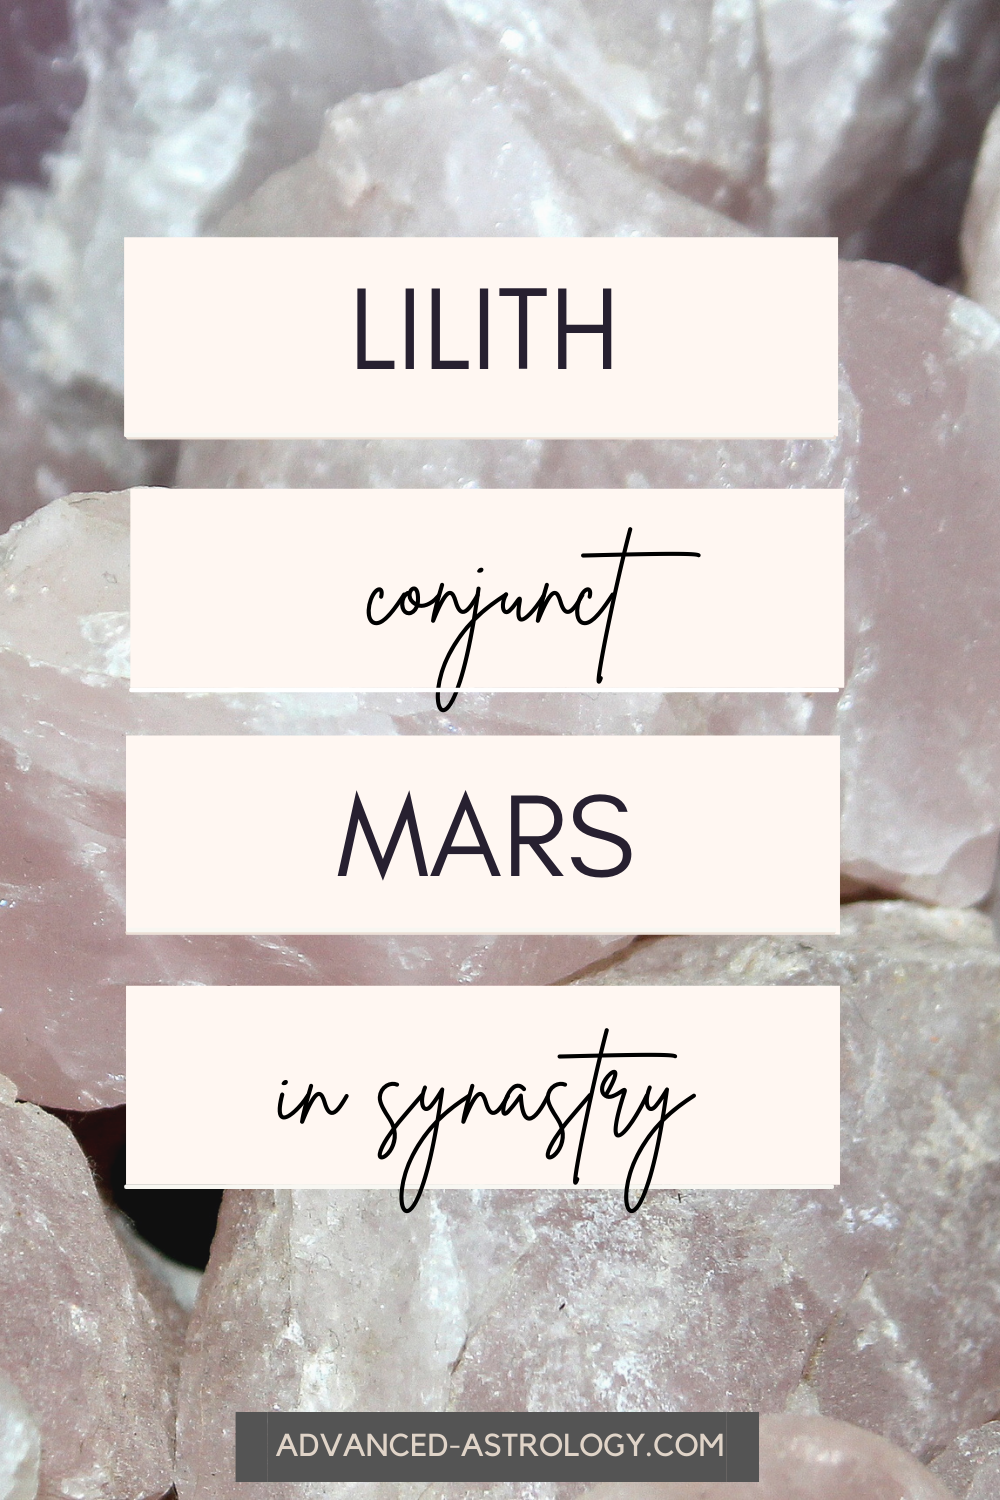 Lilith Conjunct Mars Synastry Meaning - Astrology.